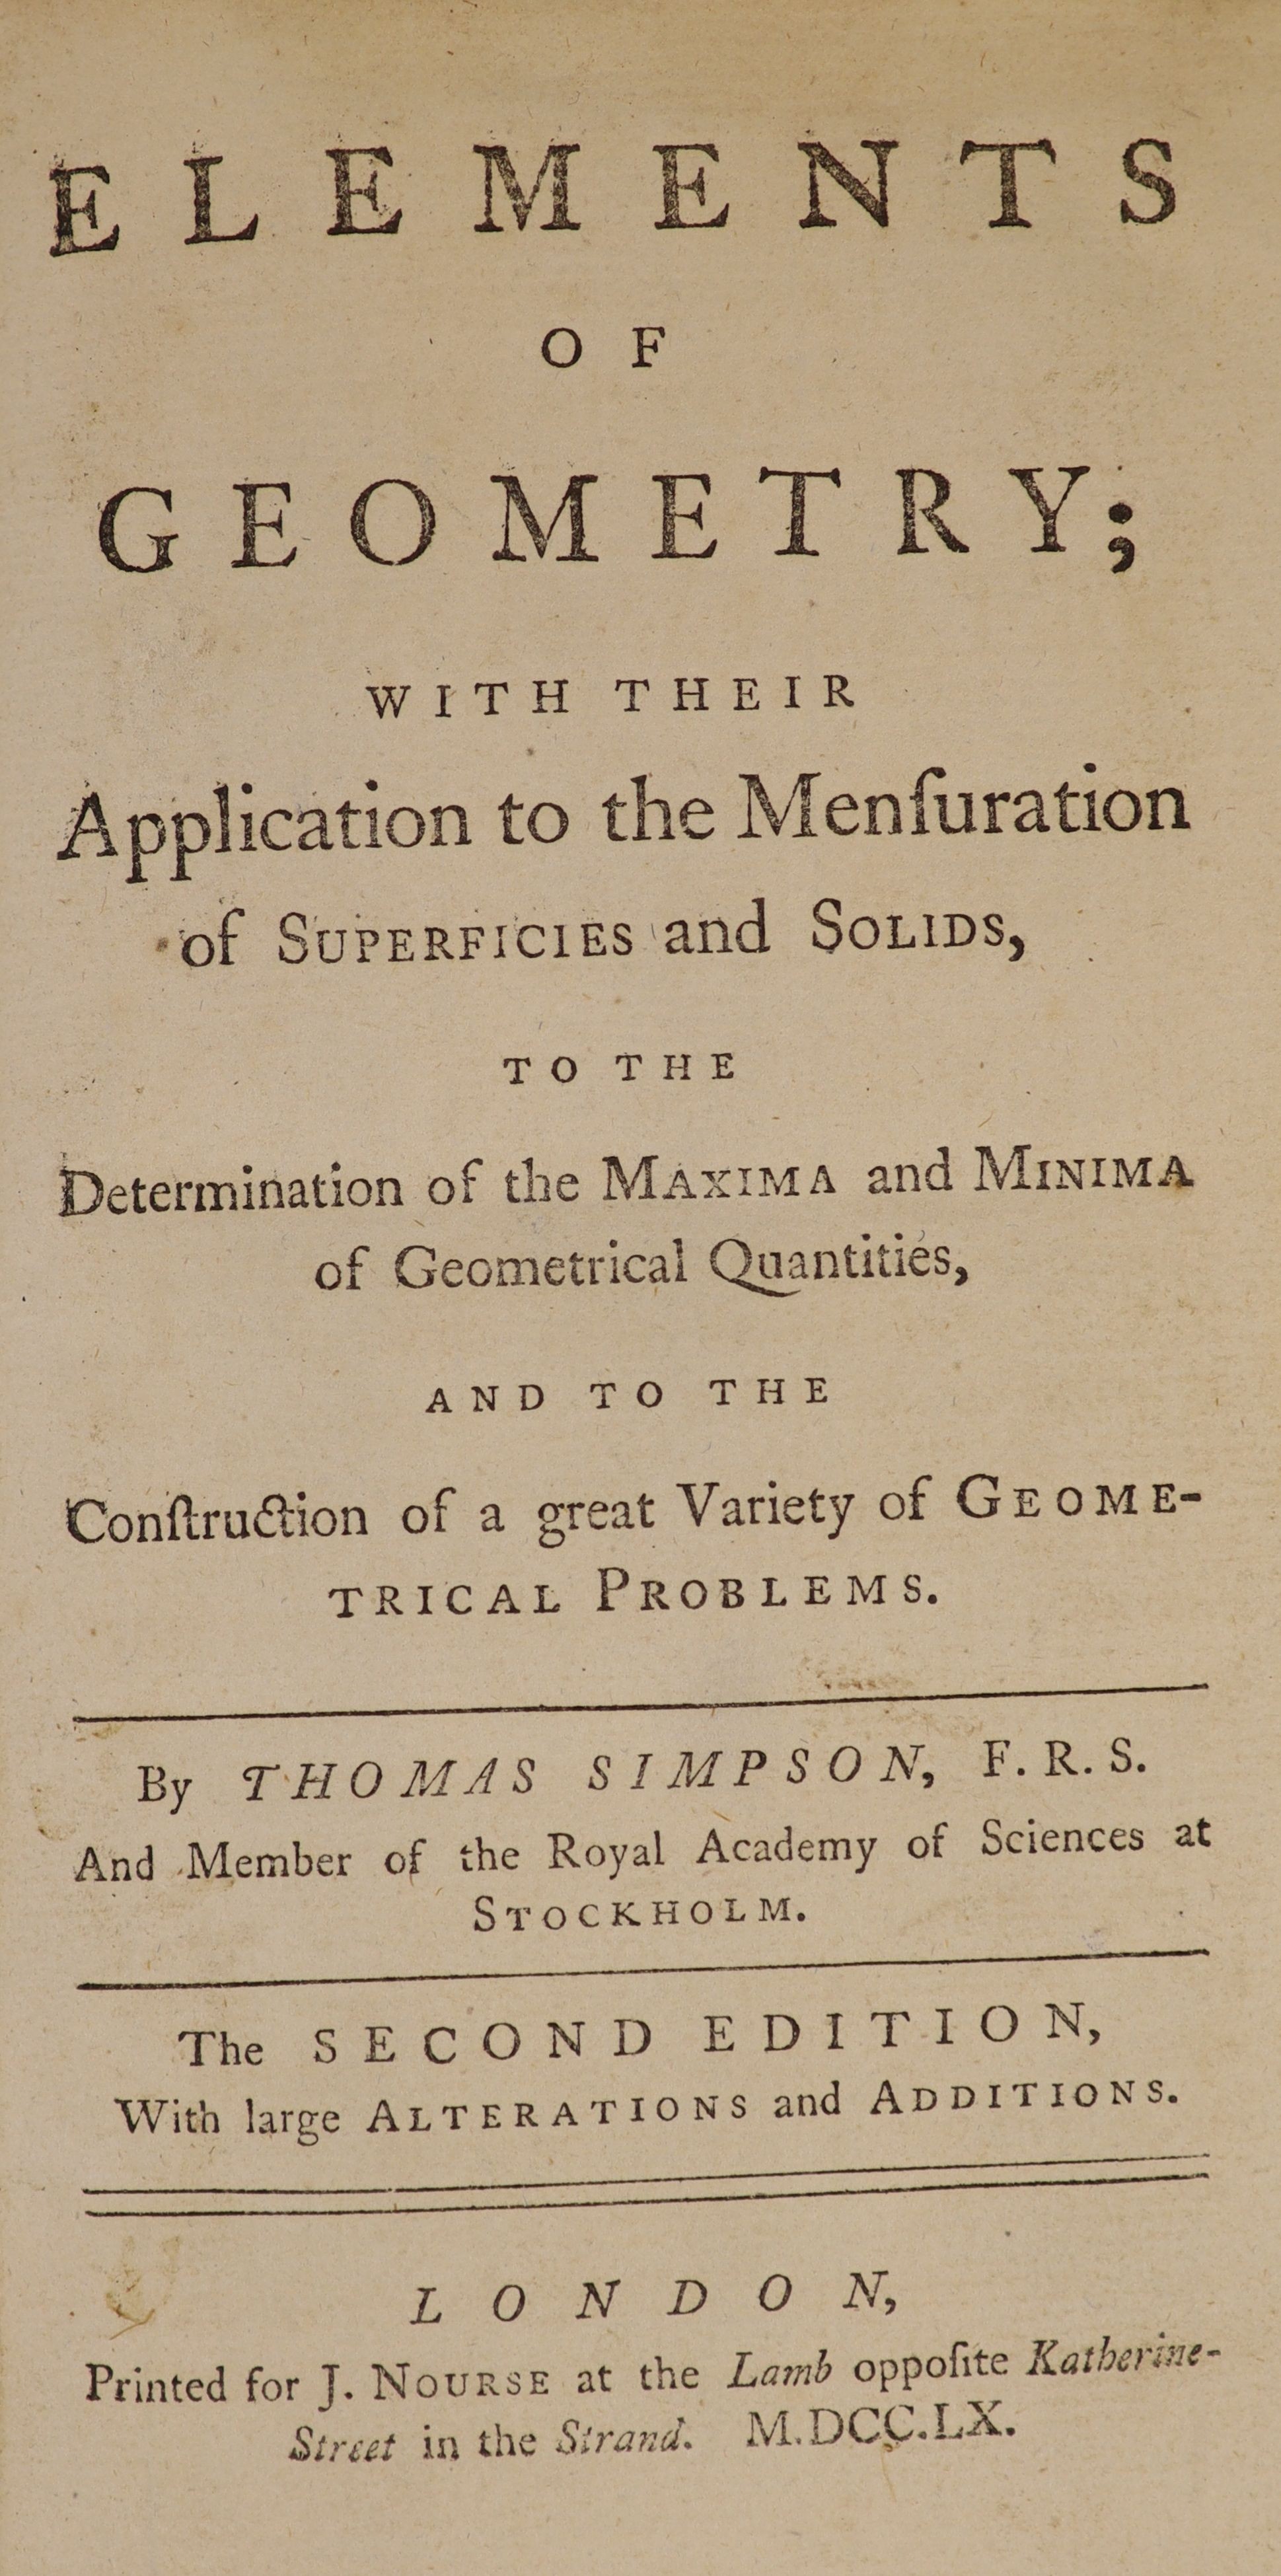 Simpson, Thomas - Elements of Geometry, 2nd edition, 8vo, calf, illustrated throughout with geometric diagrams and problems to be solved, J. Nourse, London, 1760